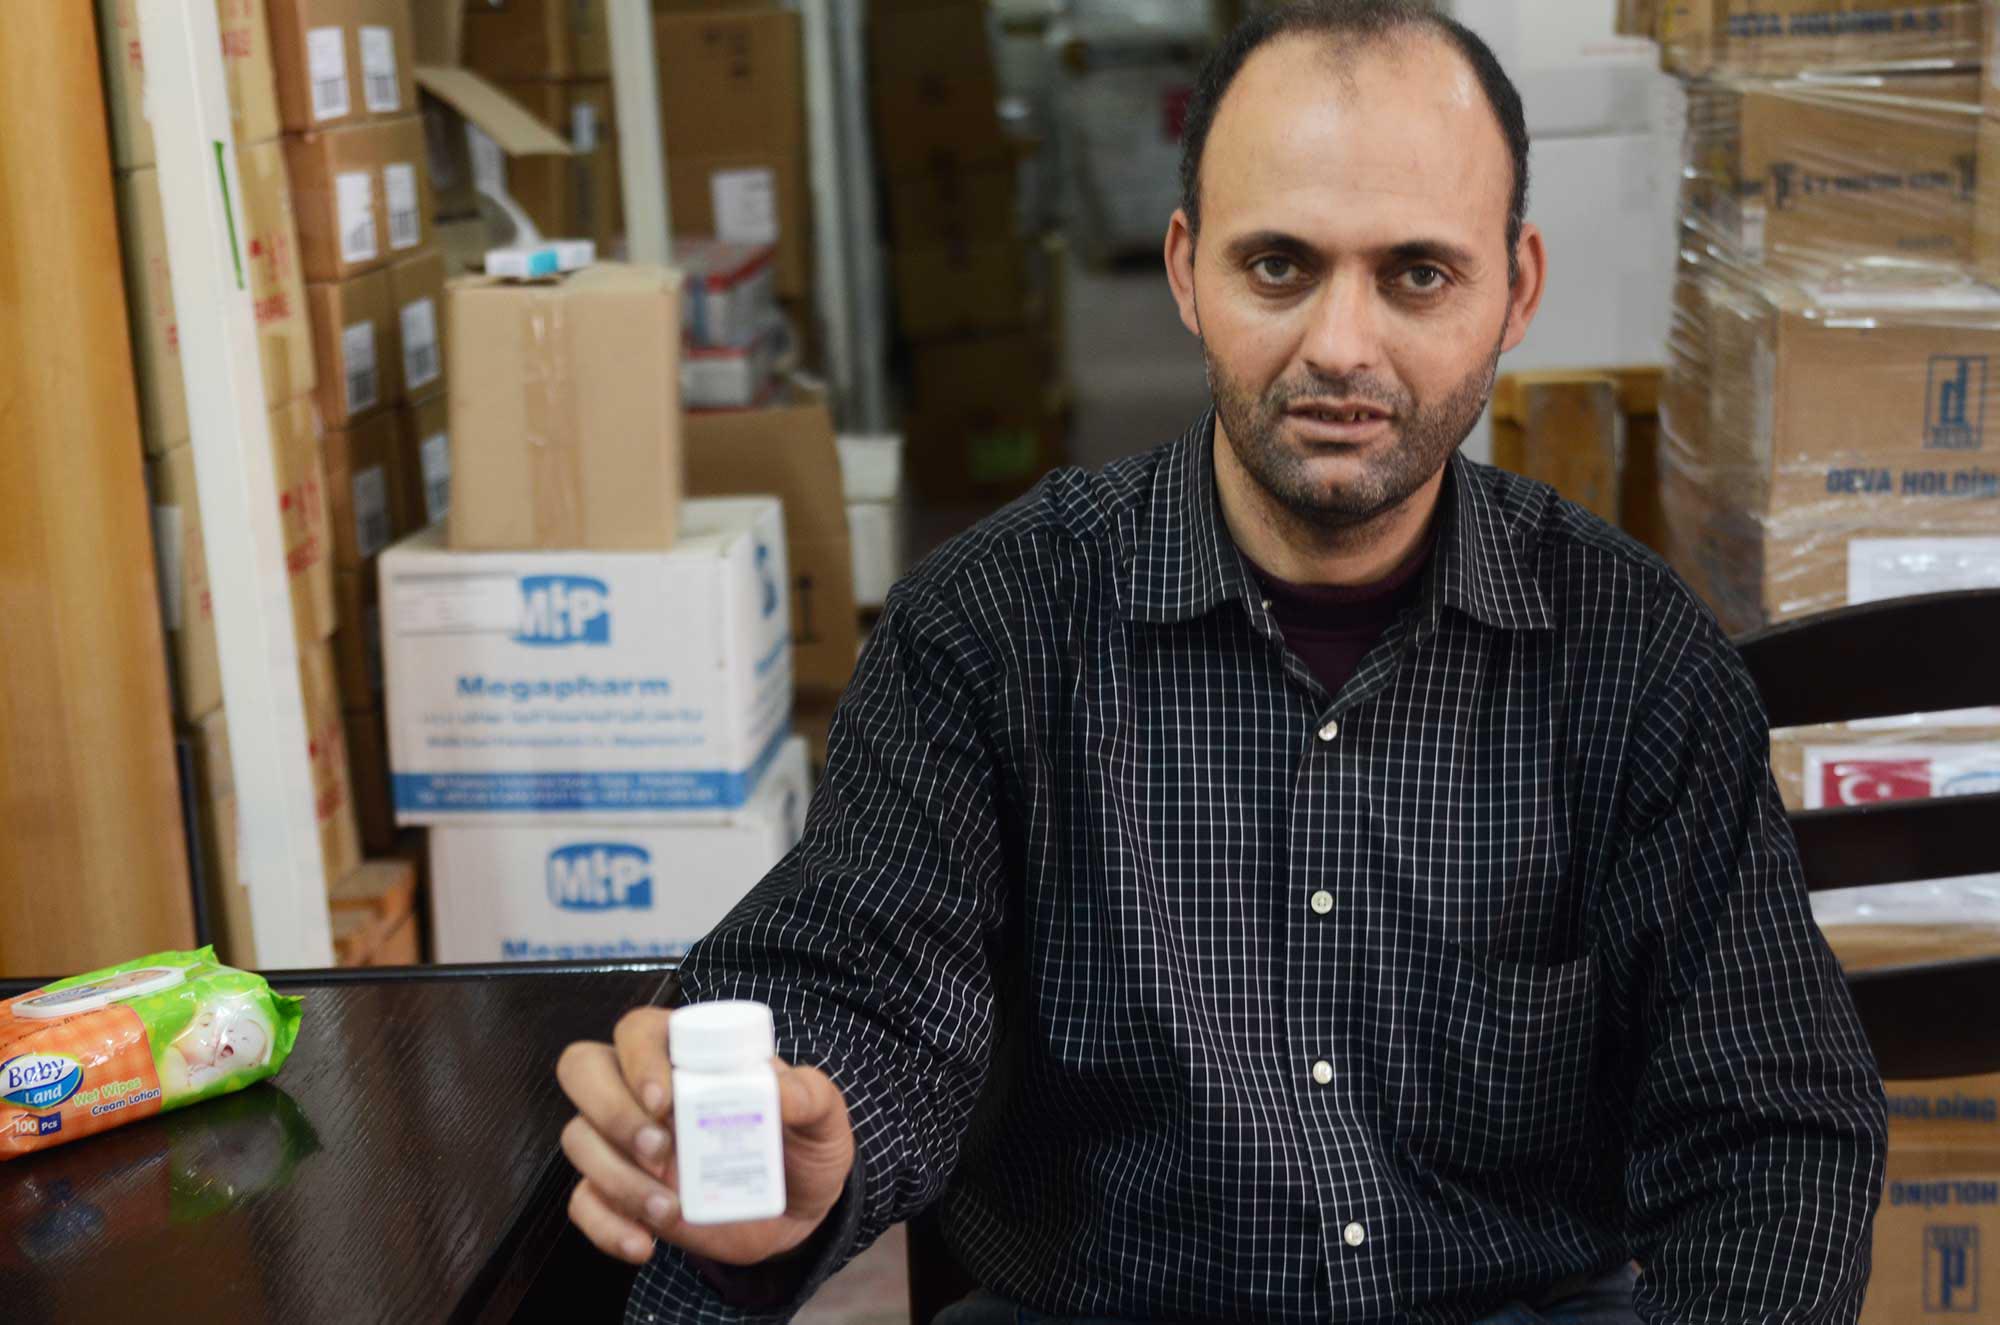 Ahmed, a type-2 diabetes patient, is thankful for the donated medicine.